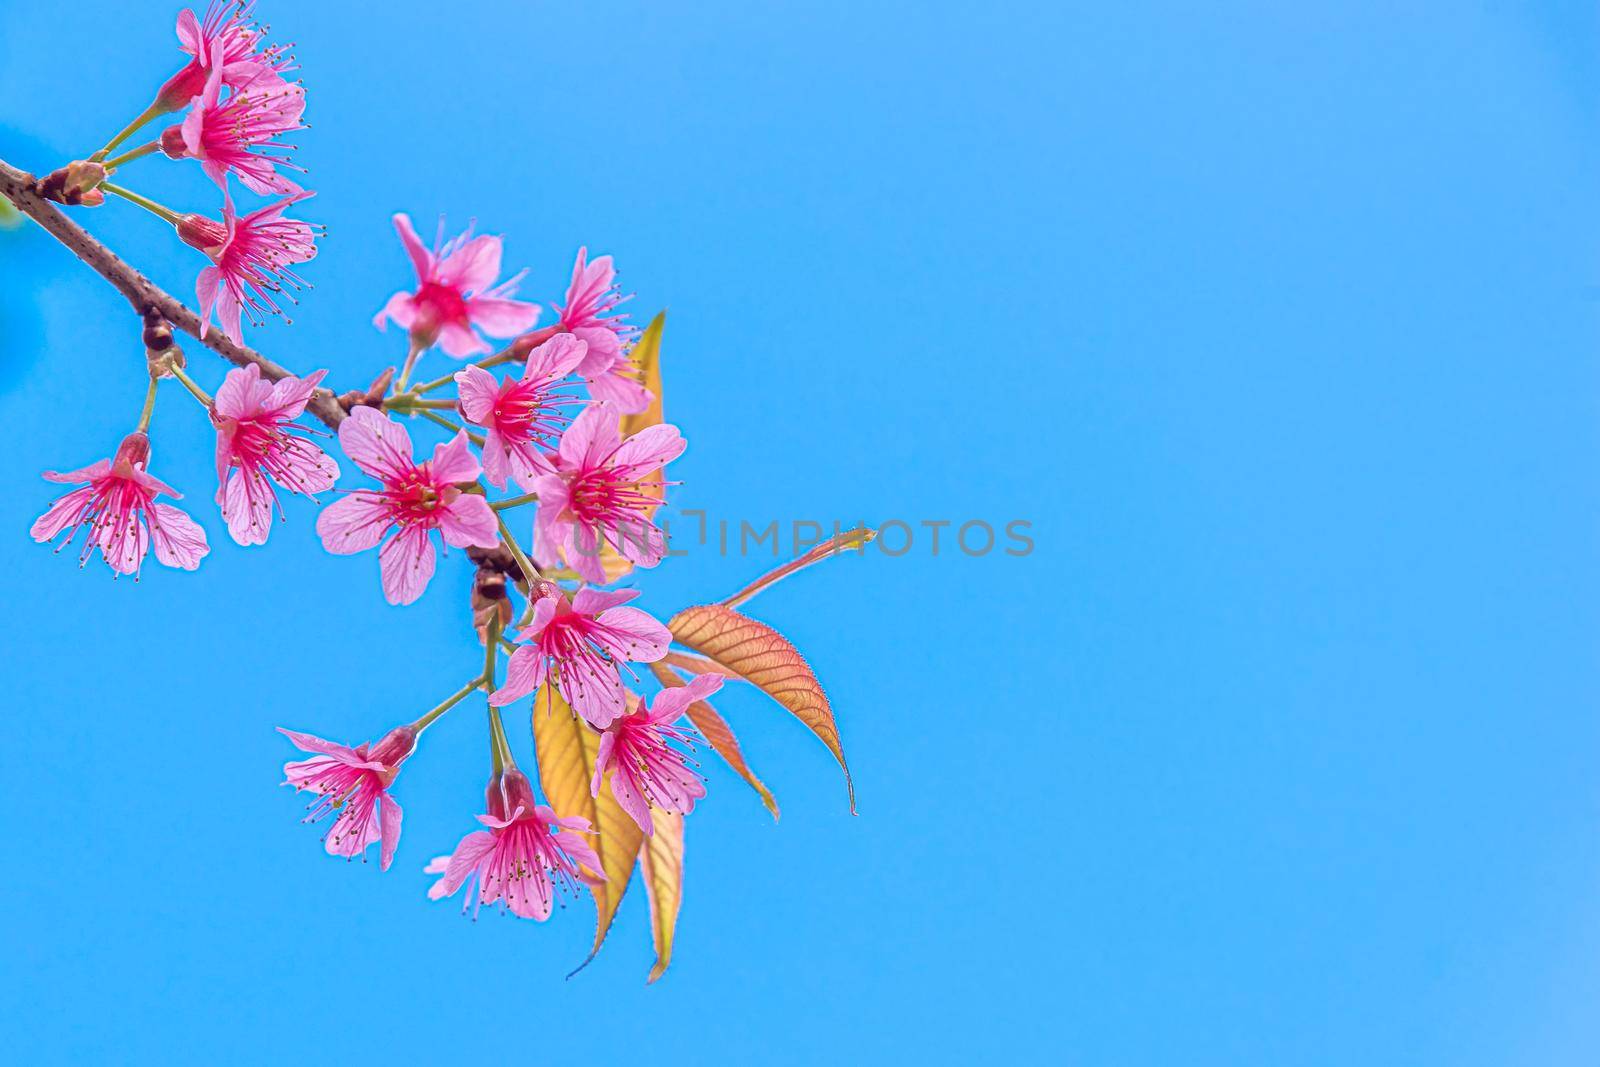 Blossom of Wild Himalayan Cherry (Prunus cerasoides) or Giant tiger flower on blue sky background In Chaing mai, Thailand. Selective focus.